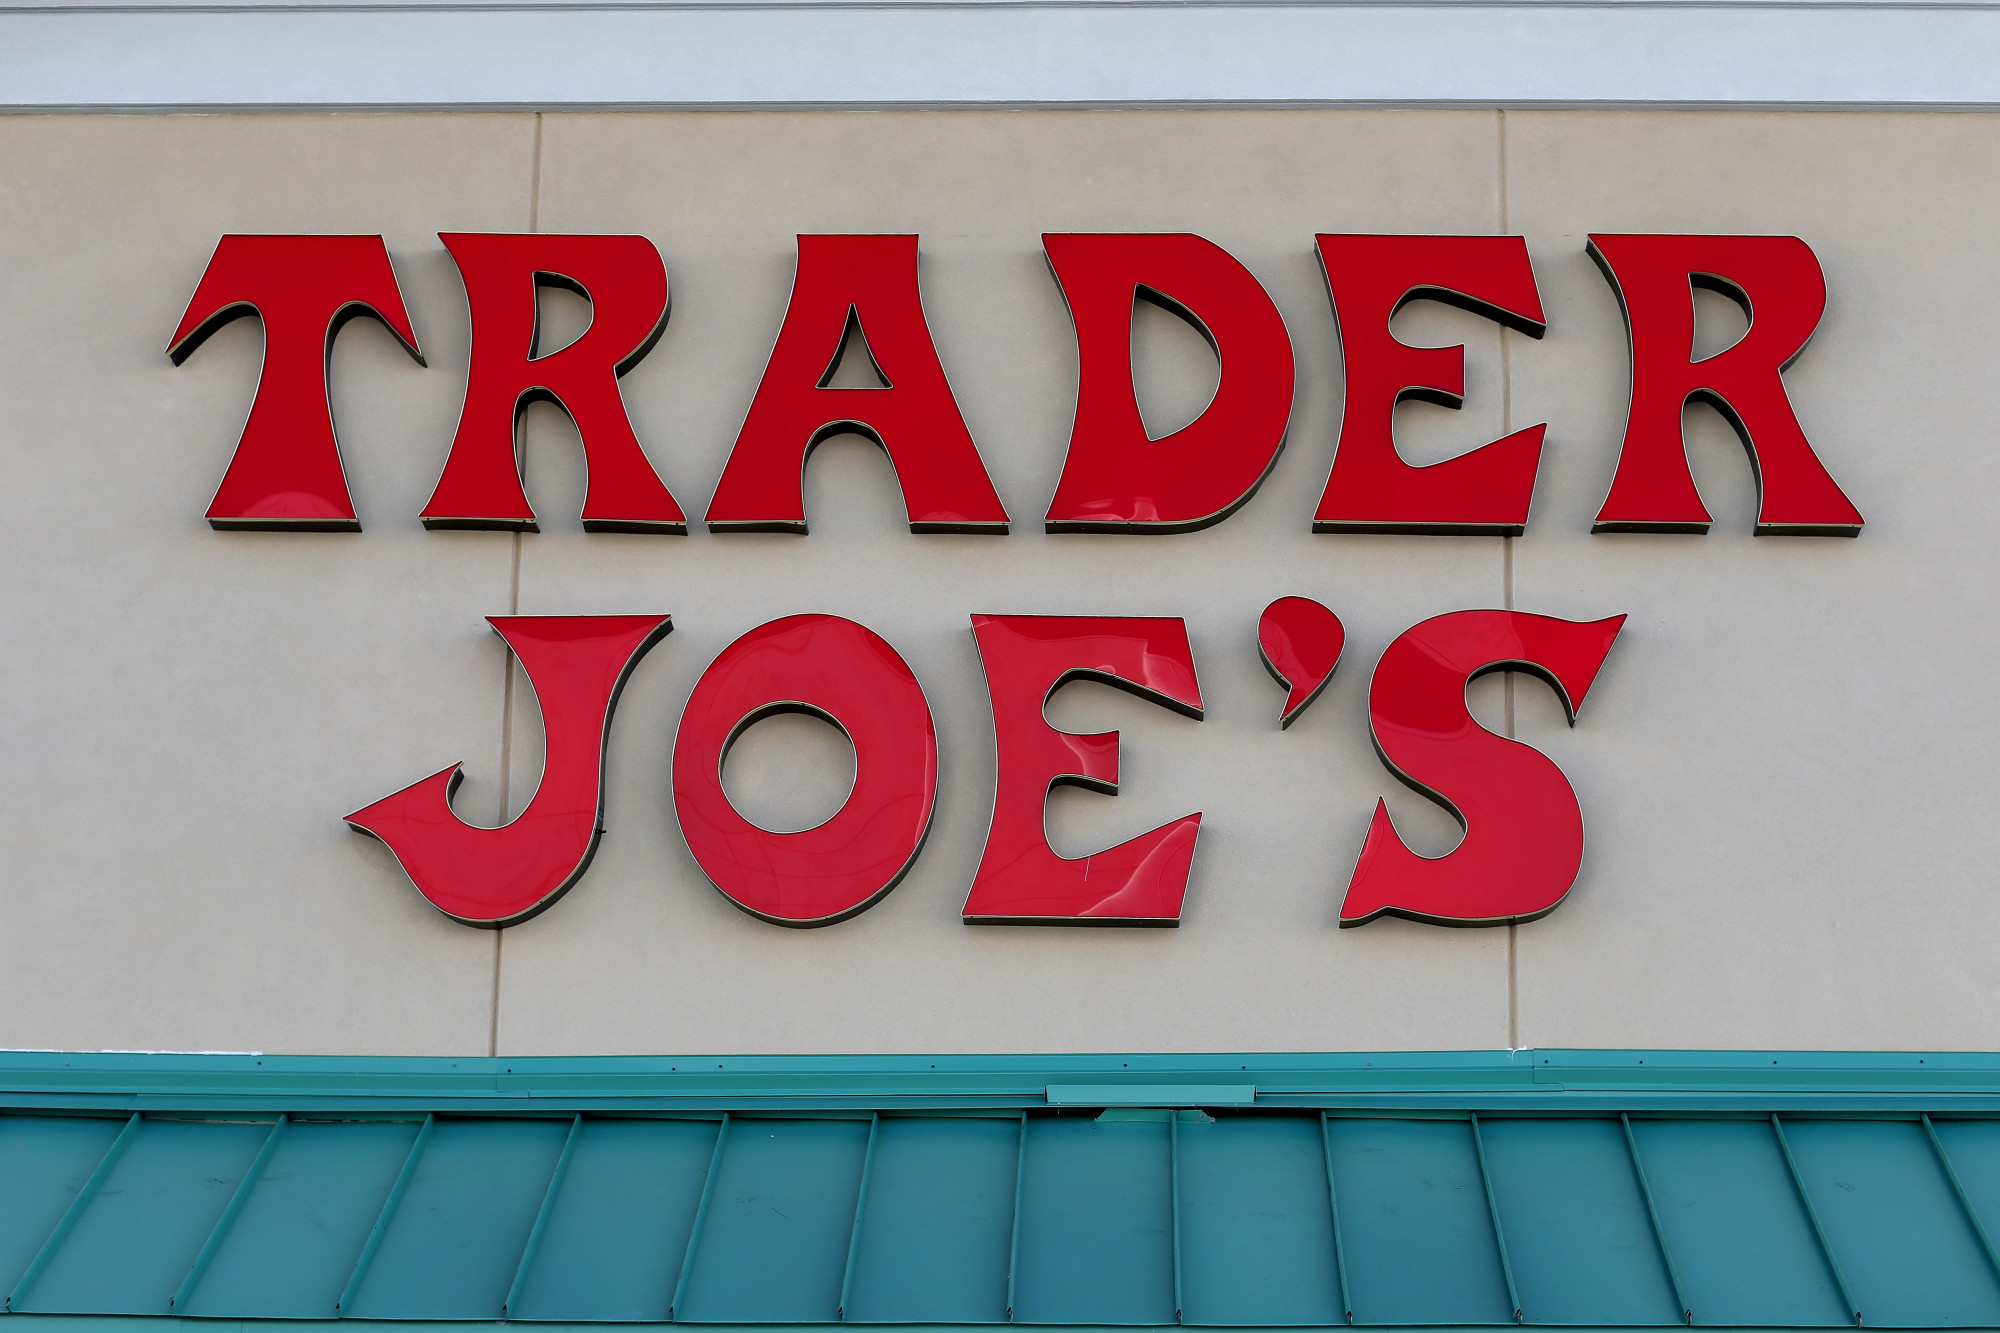 Several Products From Trader Joe’s Are Being Recalled Over Possible Listeria Contamination